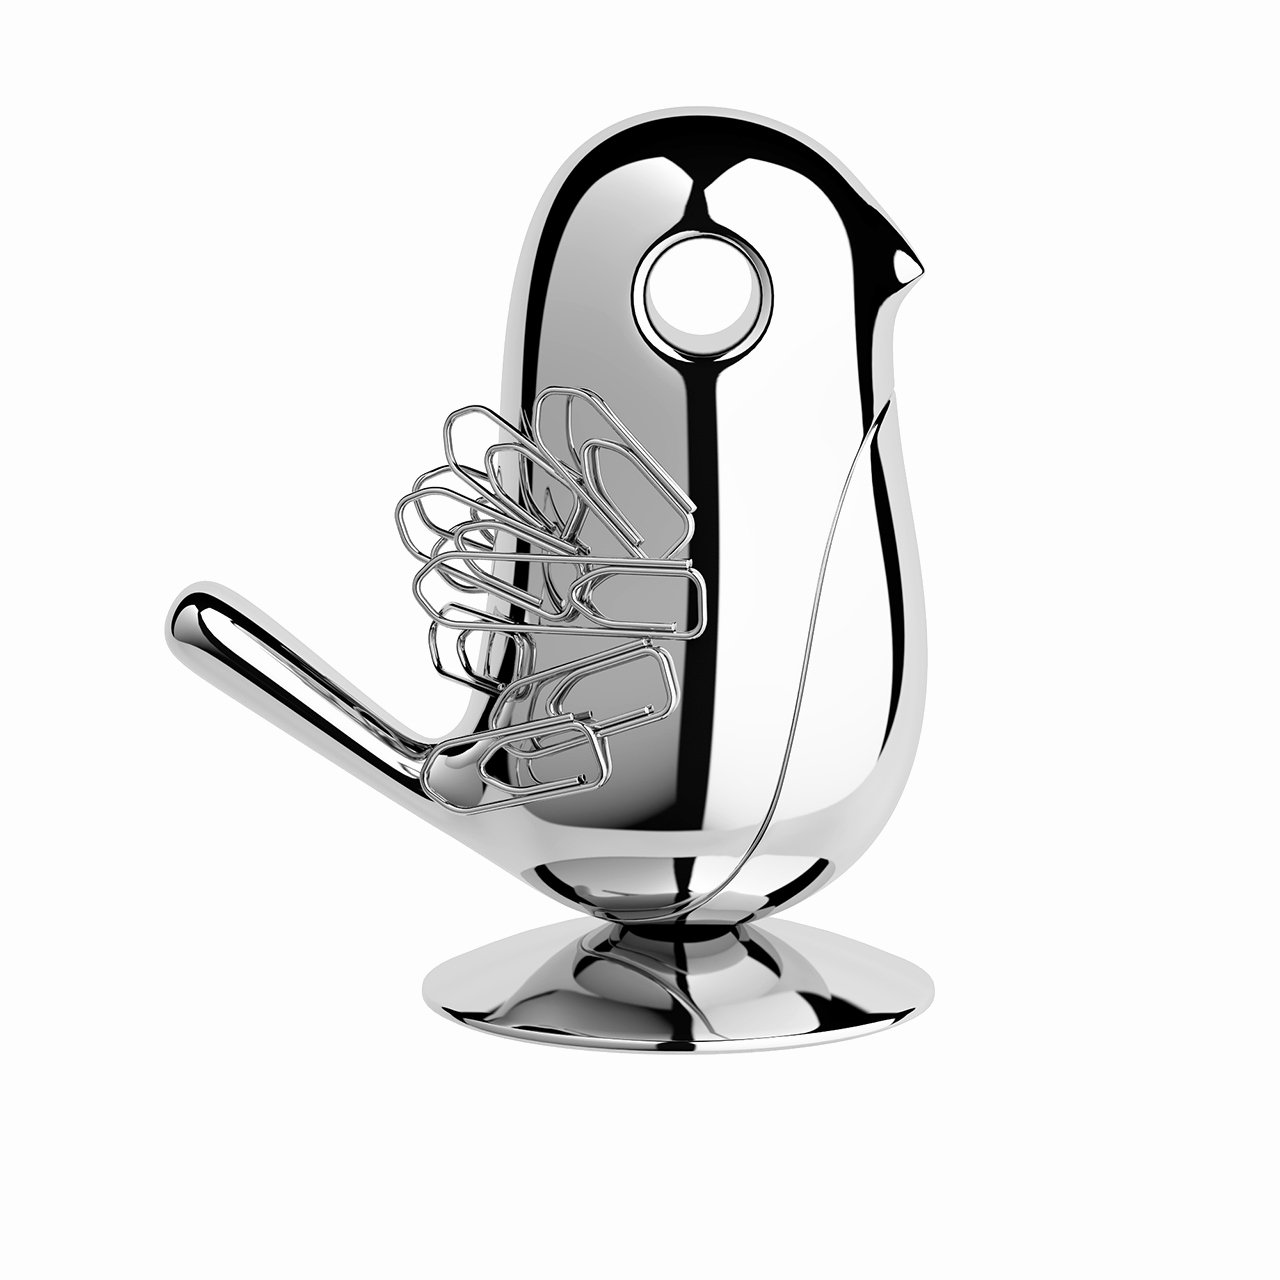 Paper Clip Holder Magnetic New Chip Magnetic Paper Clip Holder by Alessi Dimensiva